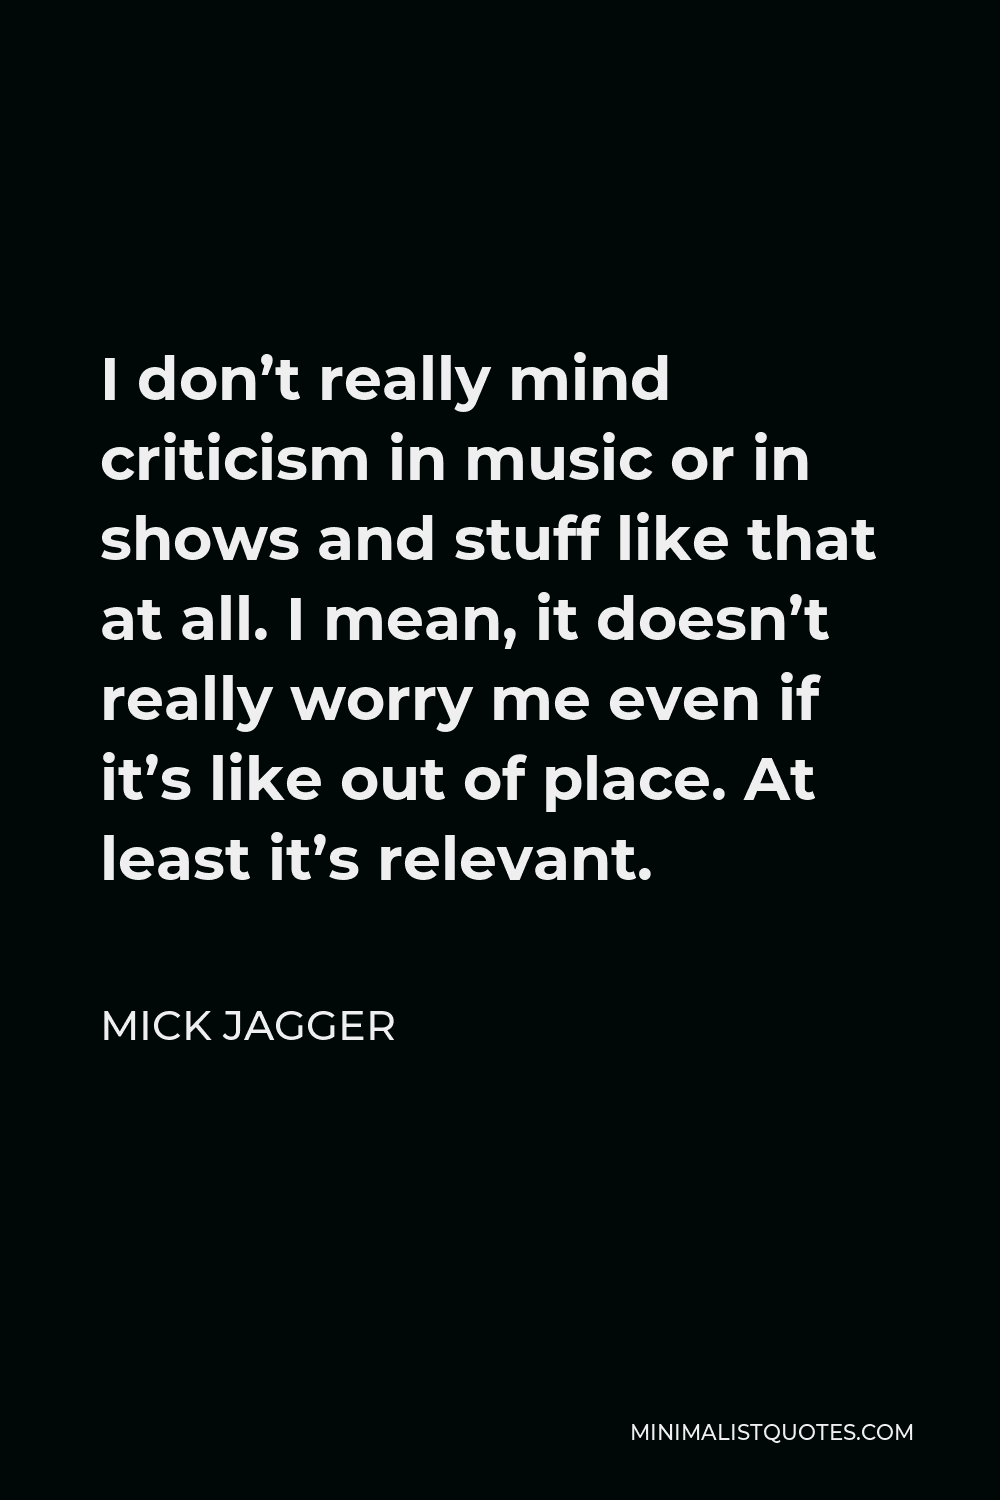 Mick Jagger Quote - I don’t really mind criticism in music or in shows and stuff like that at all. I mean, it doesn’t really worry me even if it’s like out of place. At least it’s relevant.